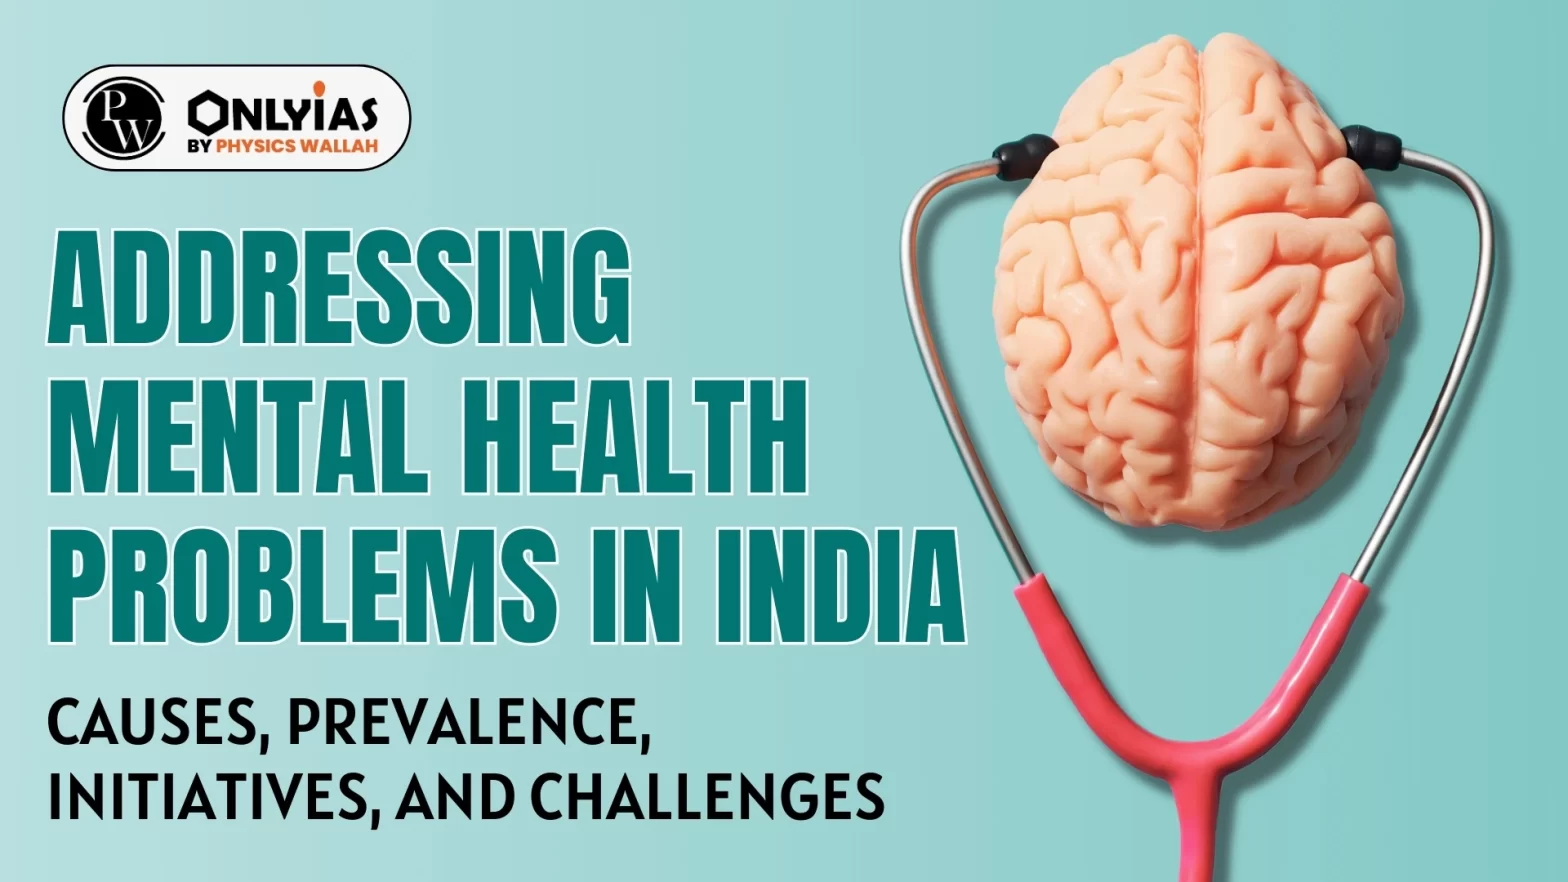 Addressing Mental Health Problems in India: Causes, Prevalence, Initiatives, and Challenges